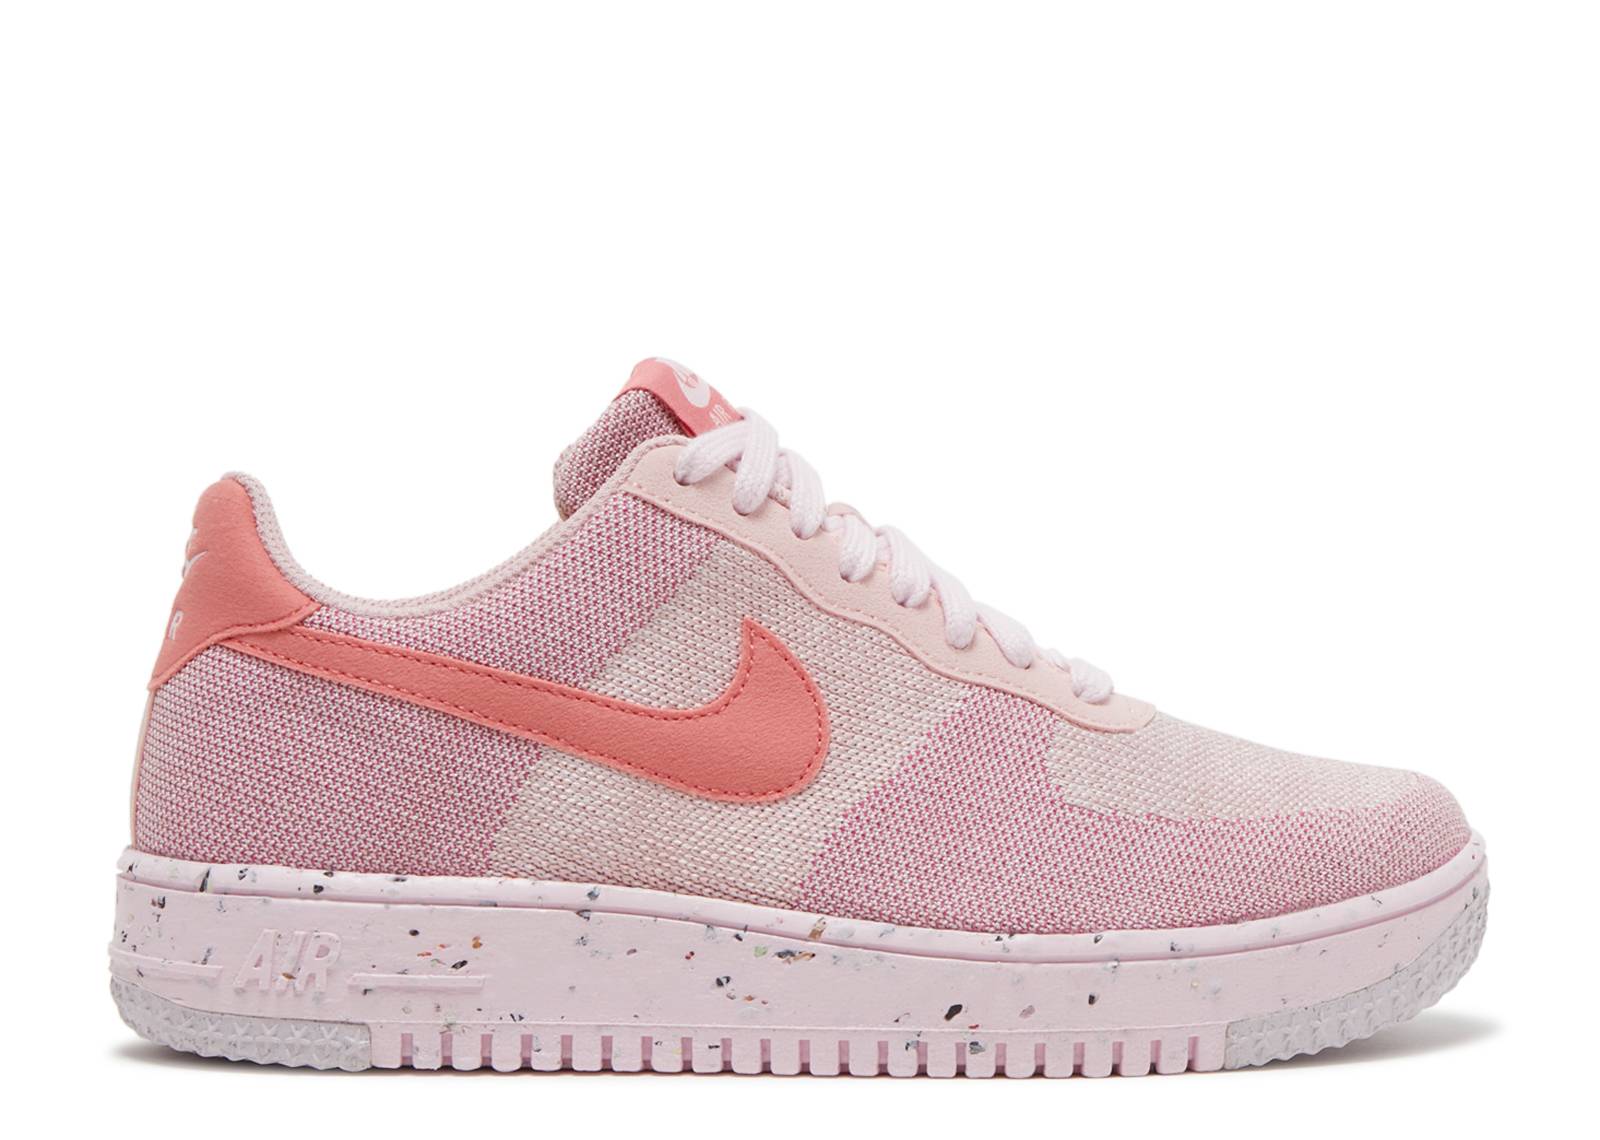 Wmns Air Force 1 Crater Flyknit 'Pink Glaze'